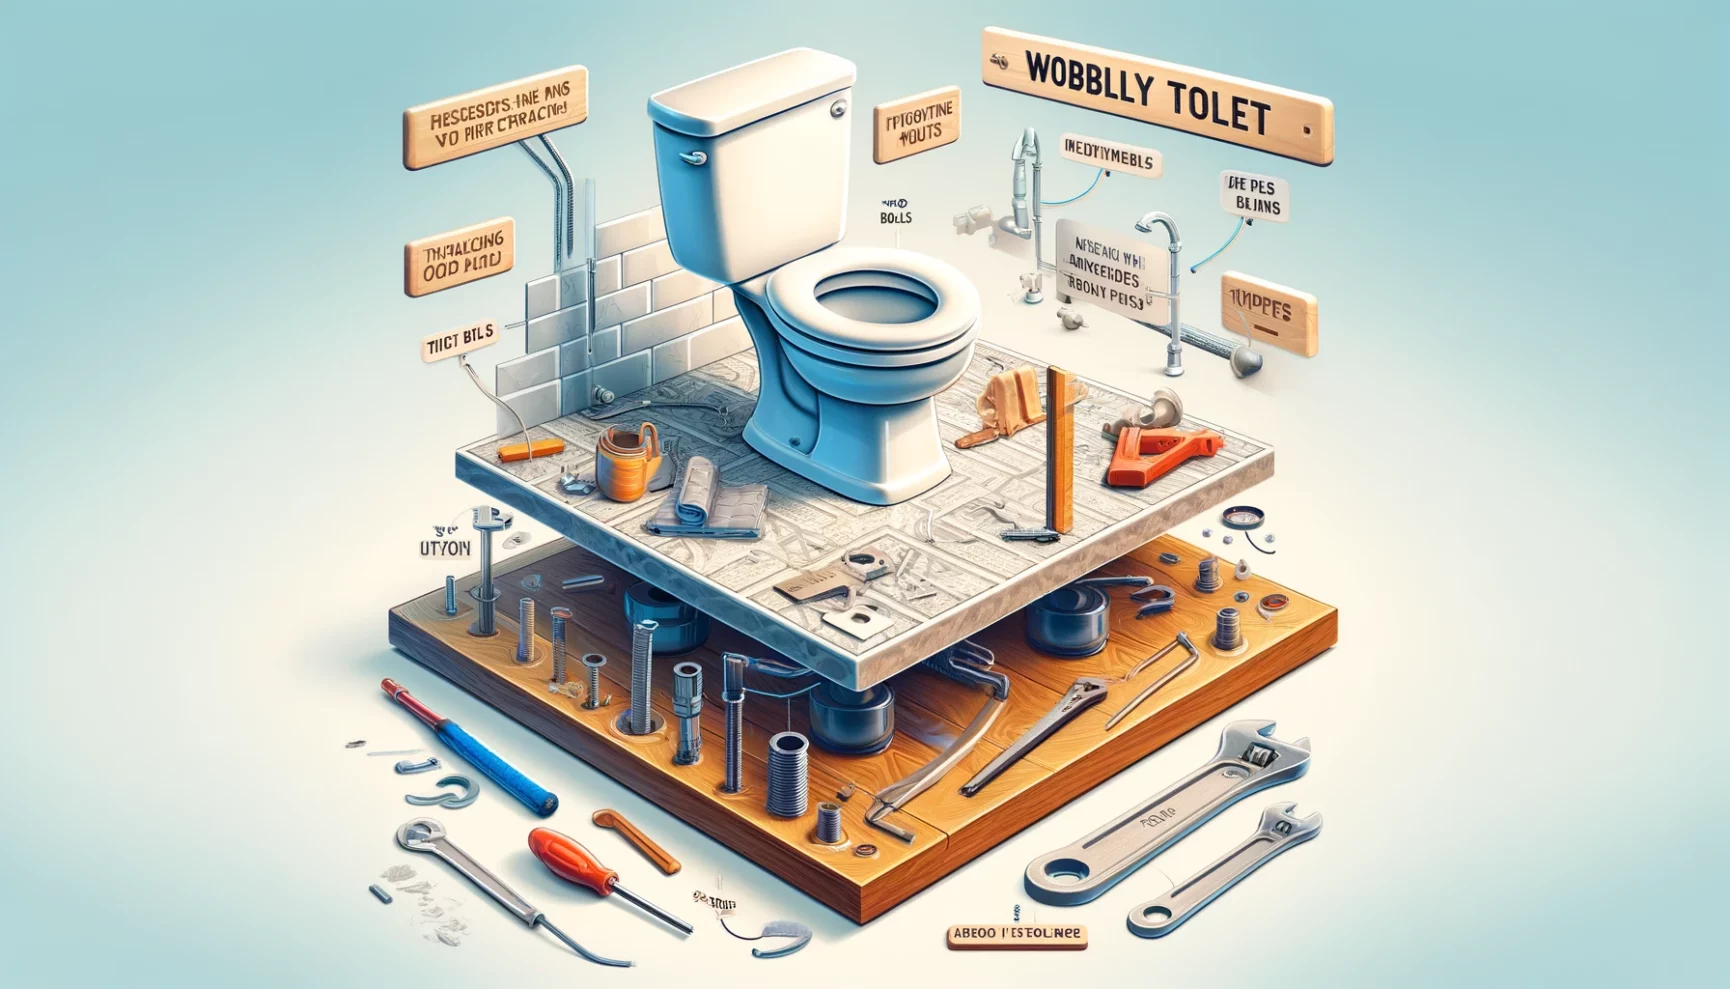 Illustrated guide to fixing a wobbly toilet with tools and components laid out on a wooden surface.